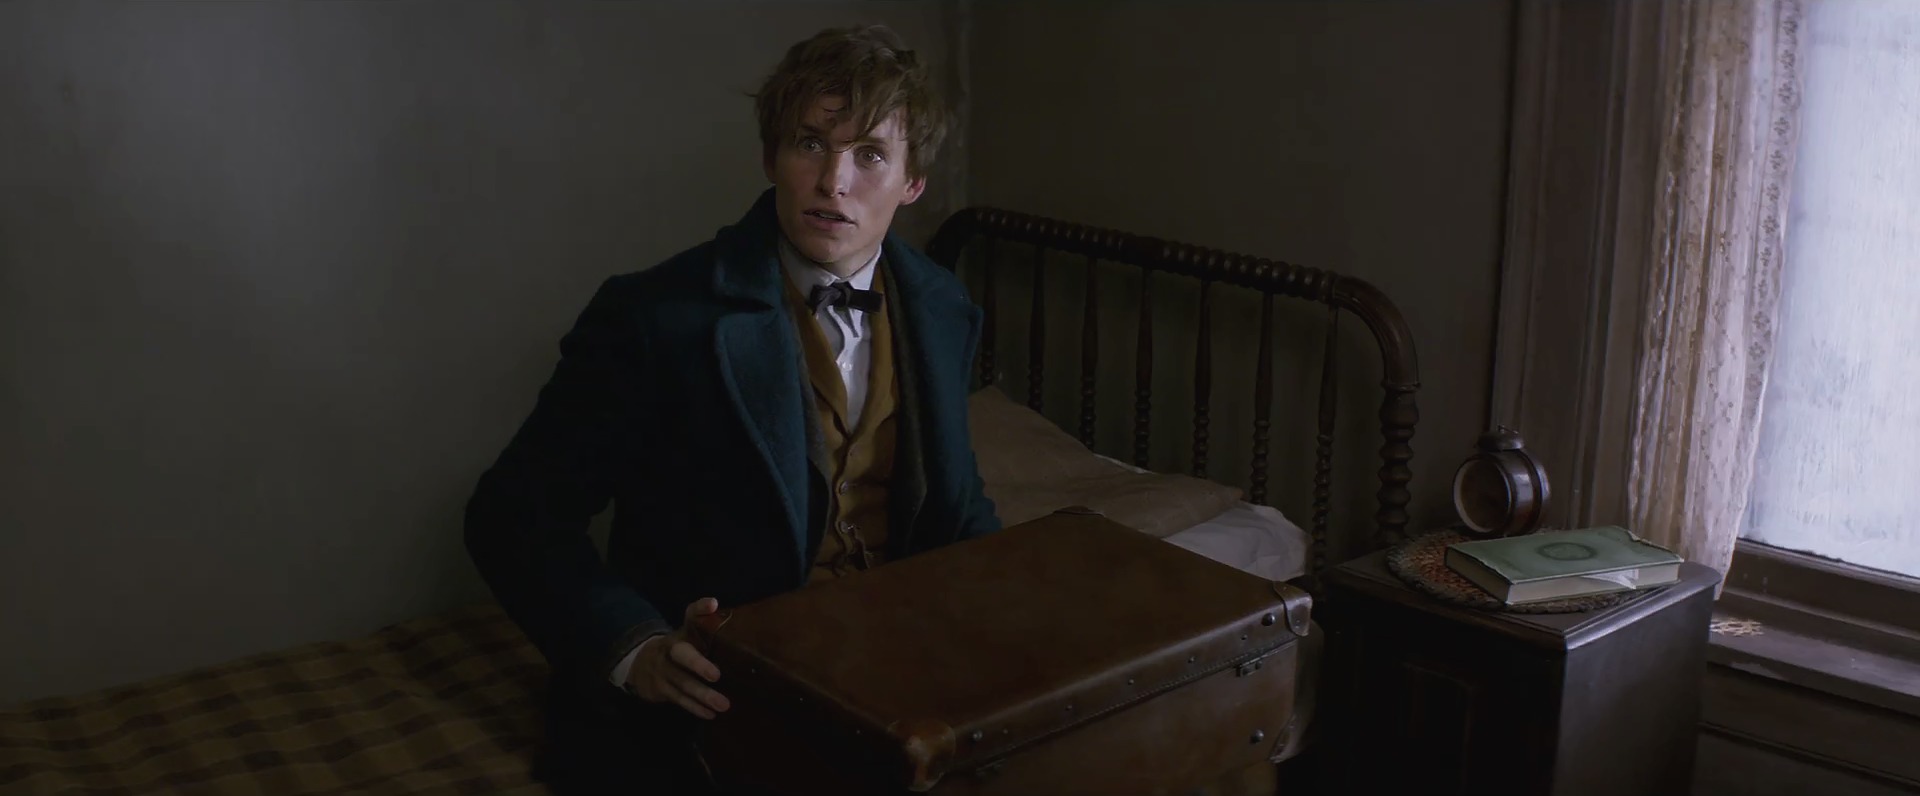 Fantastic Beasts And Where To Find Them 2016 Watch Online Film